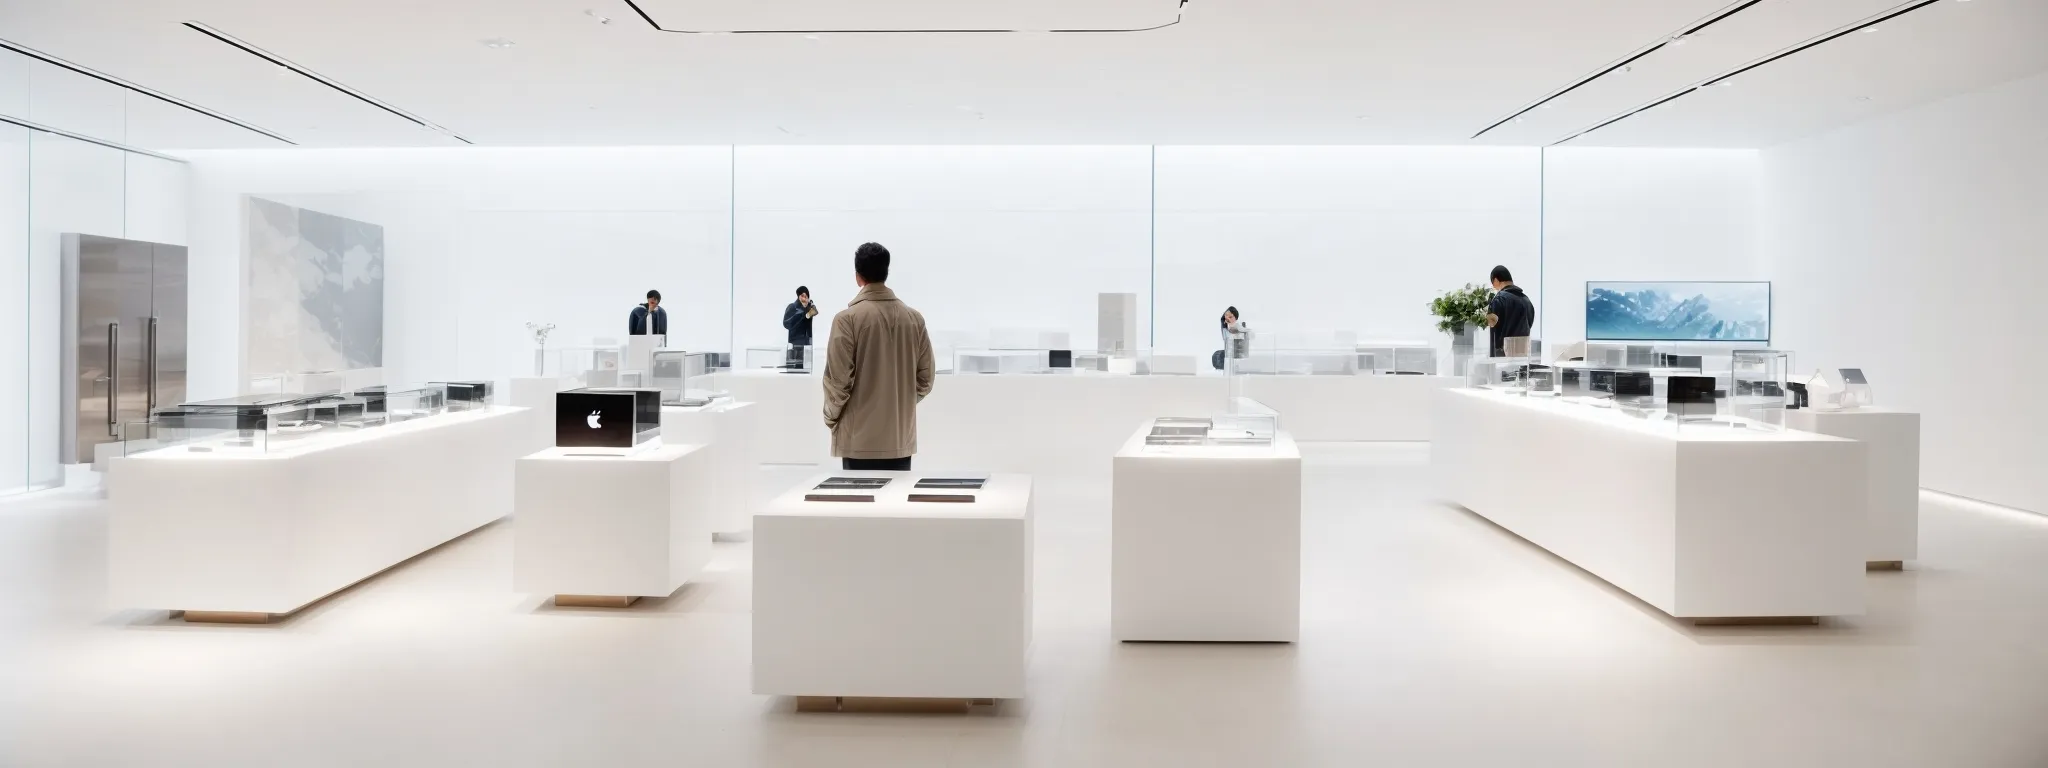 An Attendee Marvels At The Sleek, Minimalist Design Of New Apple Products Displayed In A Bright, White, Modern Showroom.